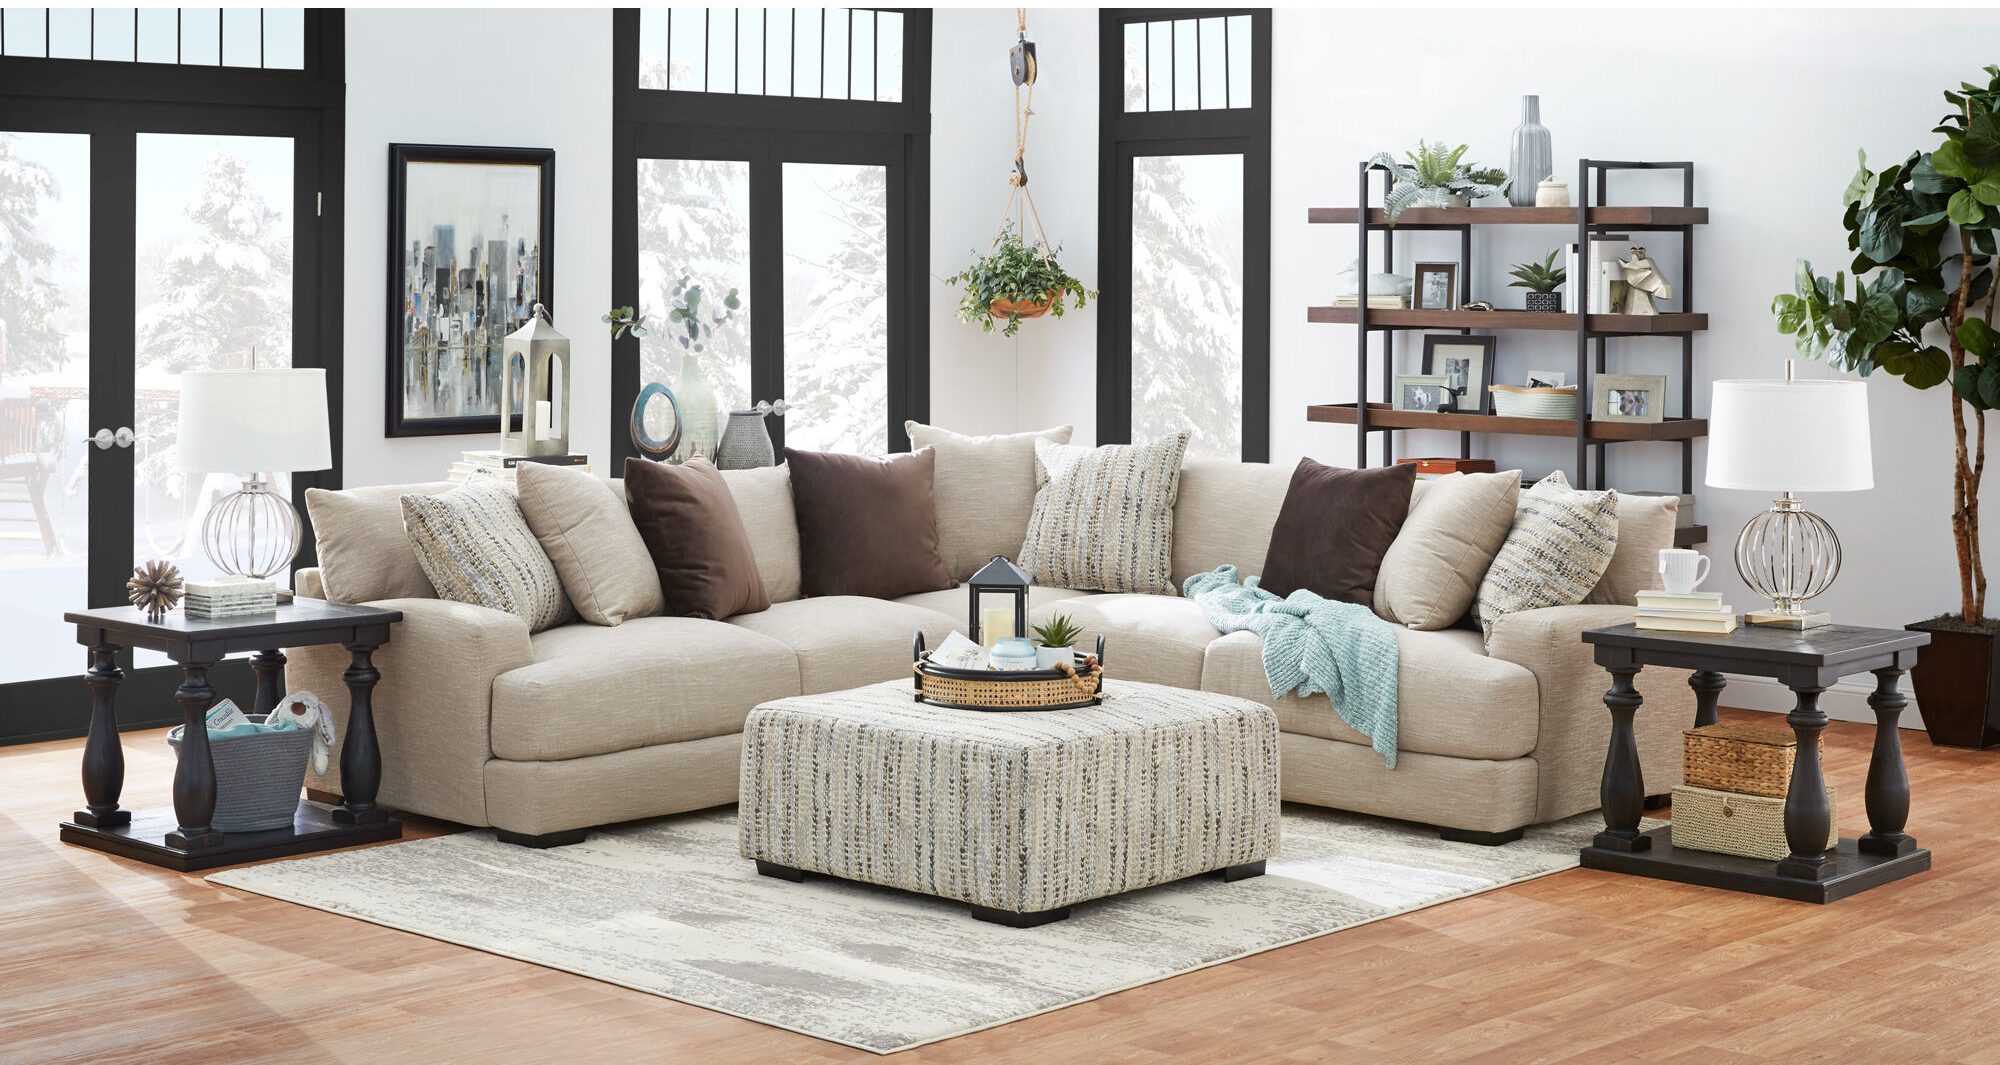 20+ Online Stores Like Wayfair for Stylish Furniture & Decor in 2022